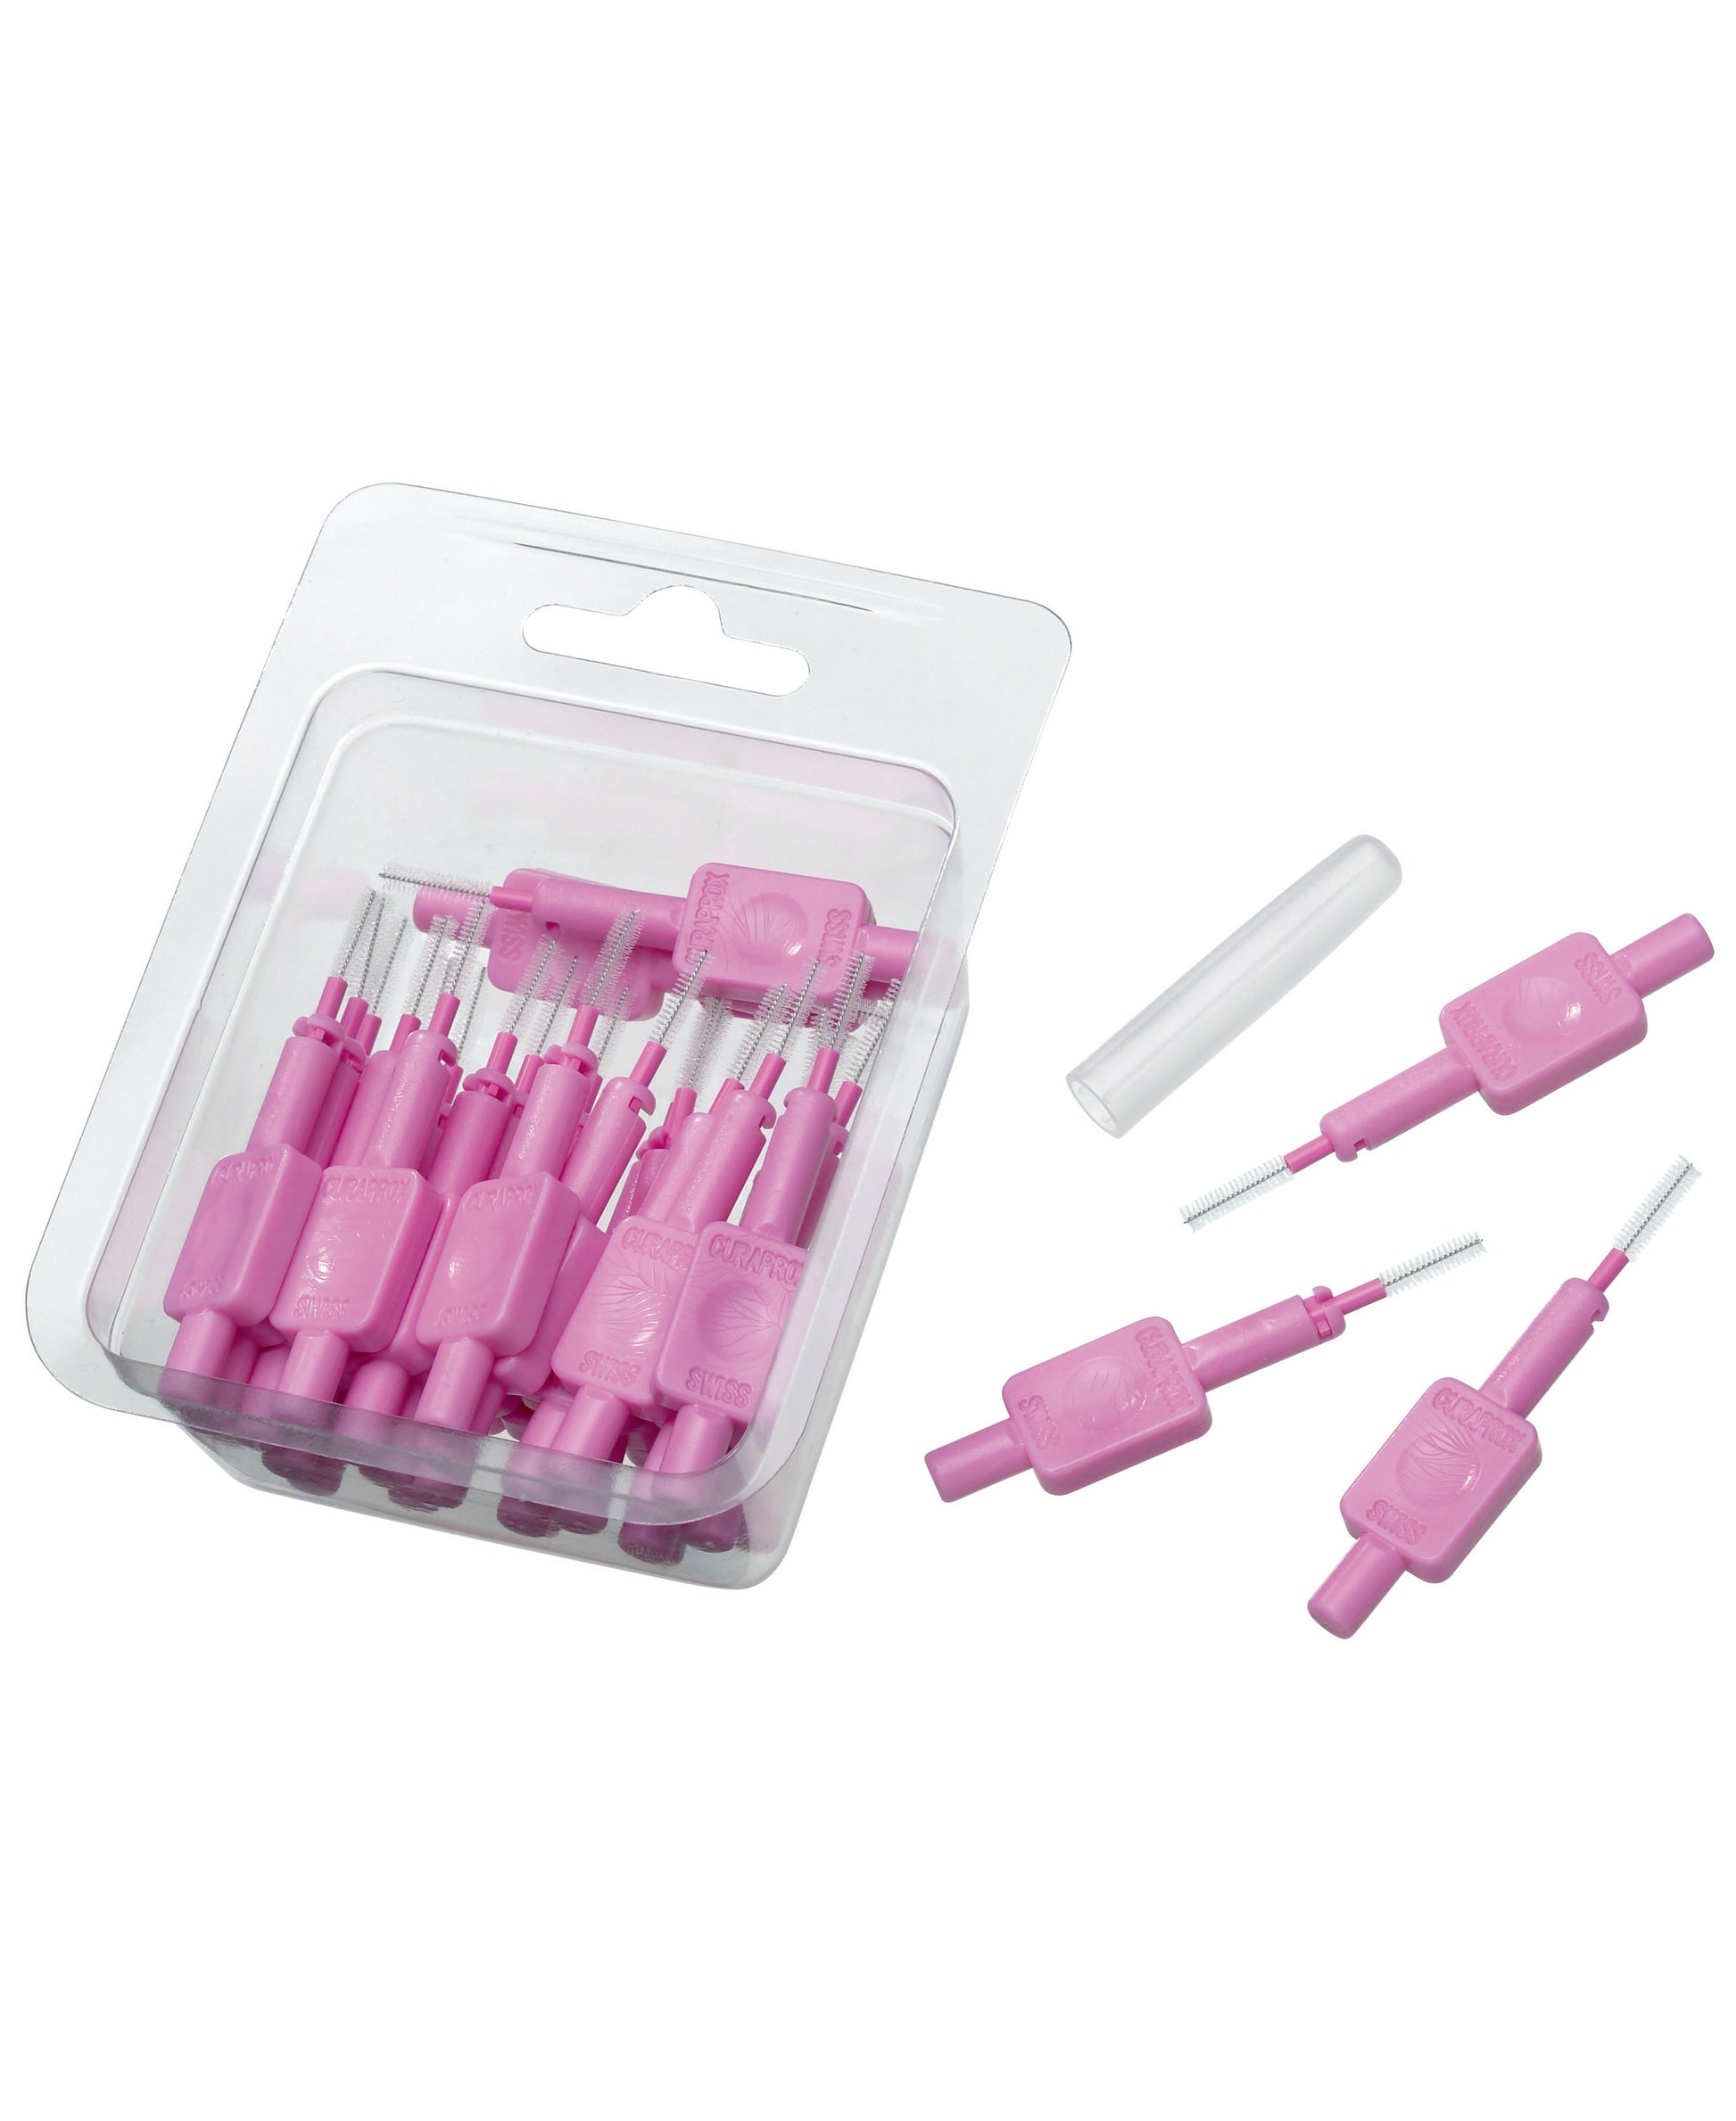 Curaprox Interdental Brushes Cps08 Pack Of 30